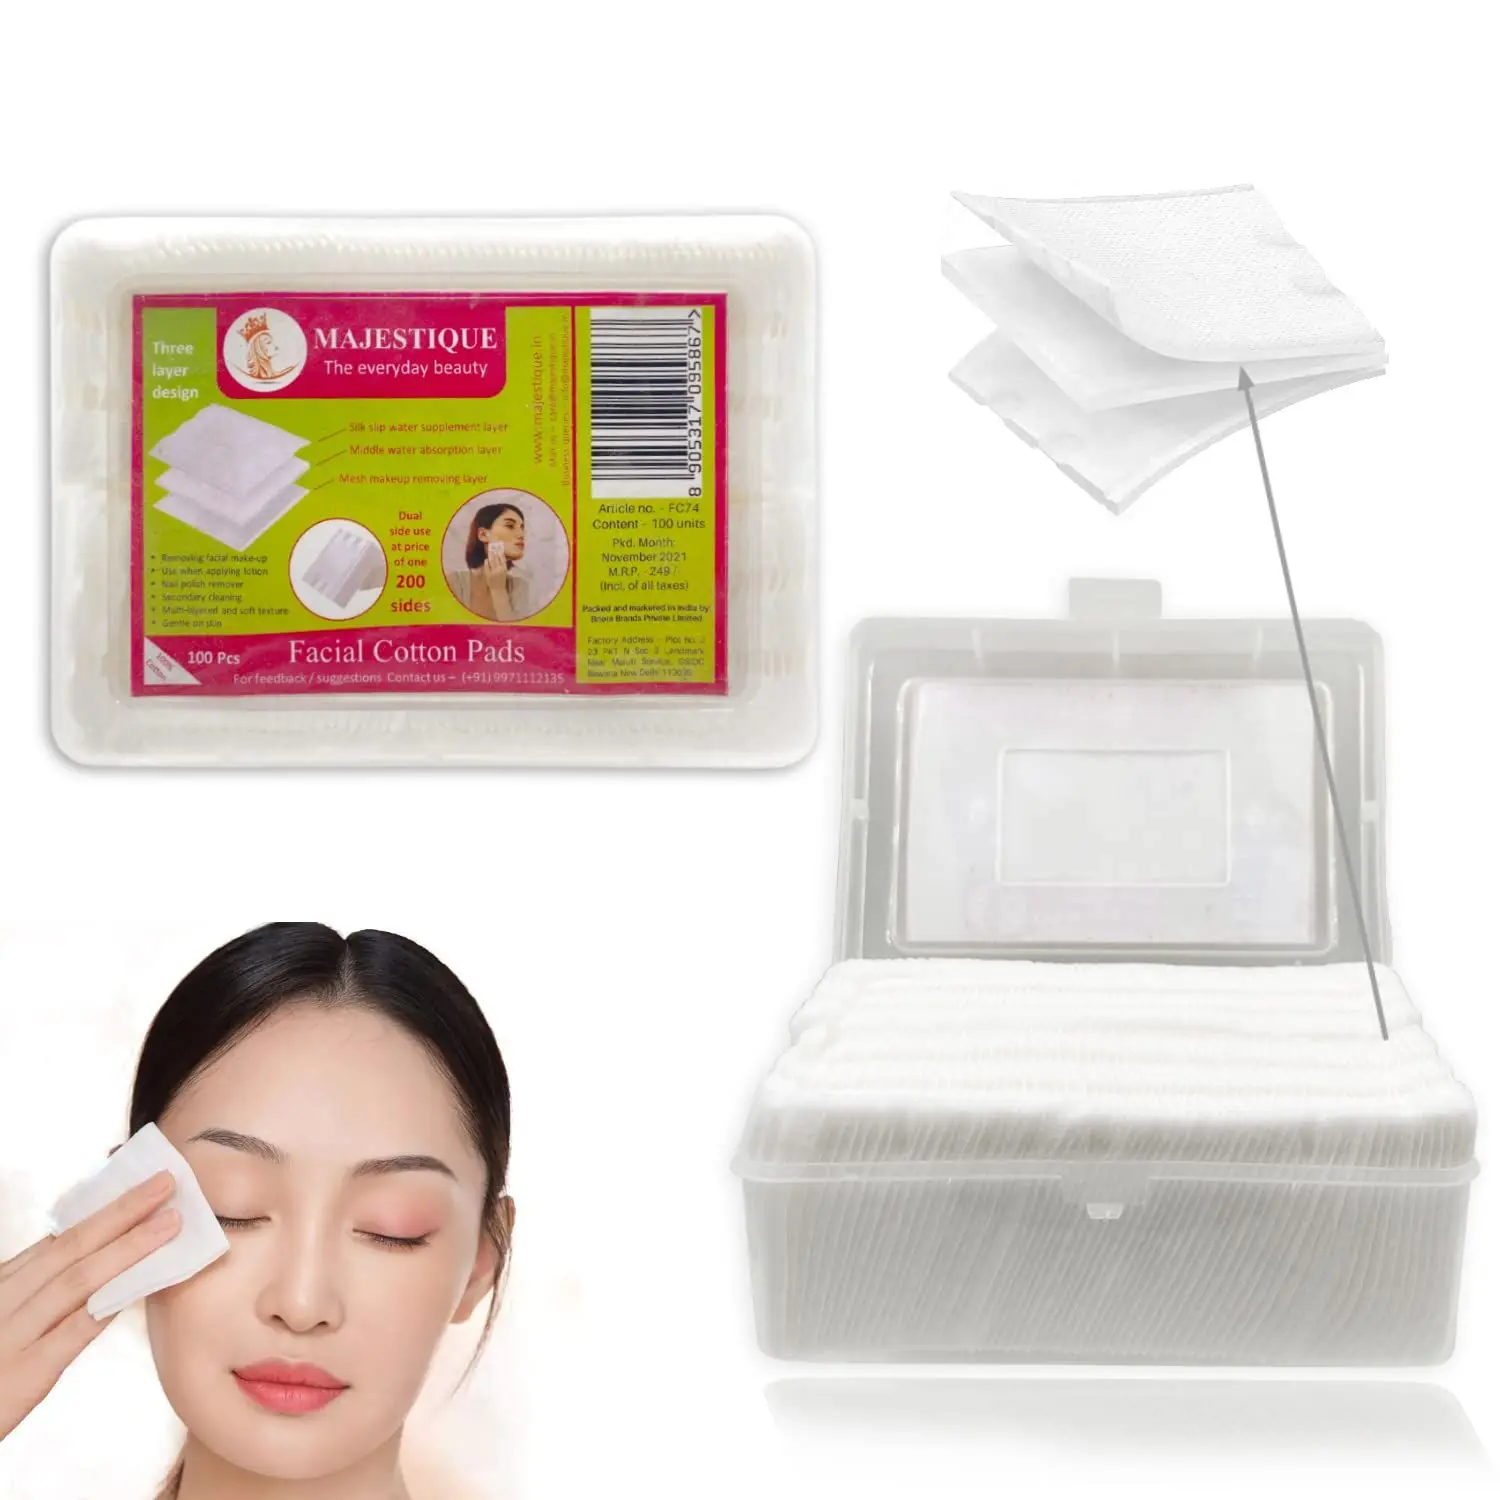 Majestique 100Pcs Soft Touch Facial Cotton Pads, Makeup Remover Wipes for Cleansing Skin & Nail Polish Remover